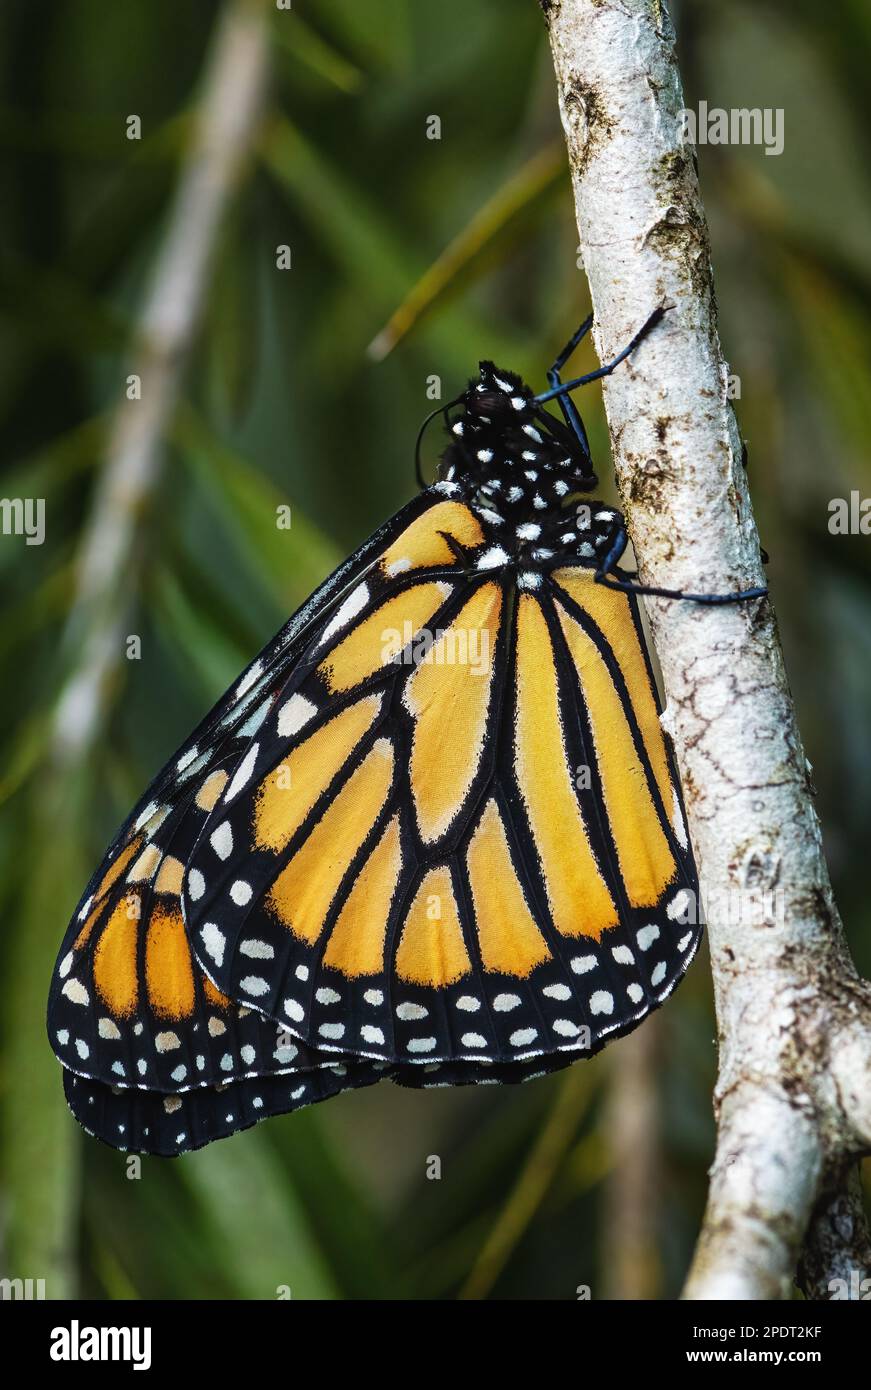 Monarch butterfly population moves closer to extinction